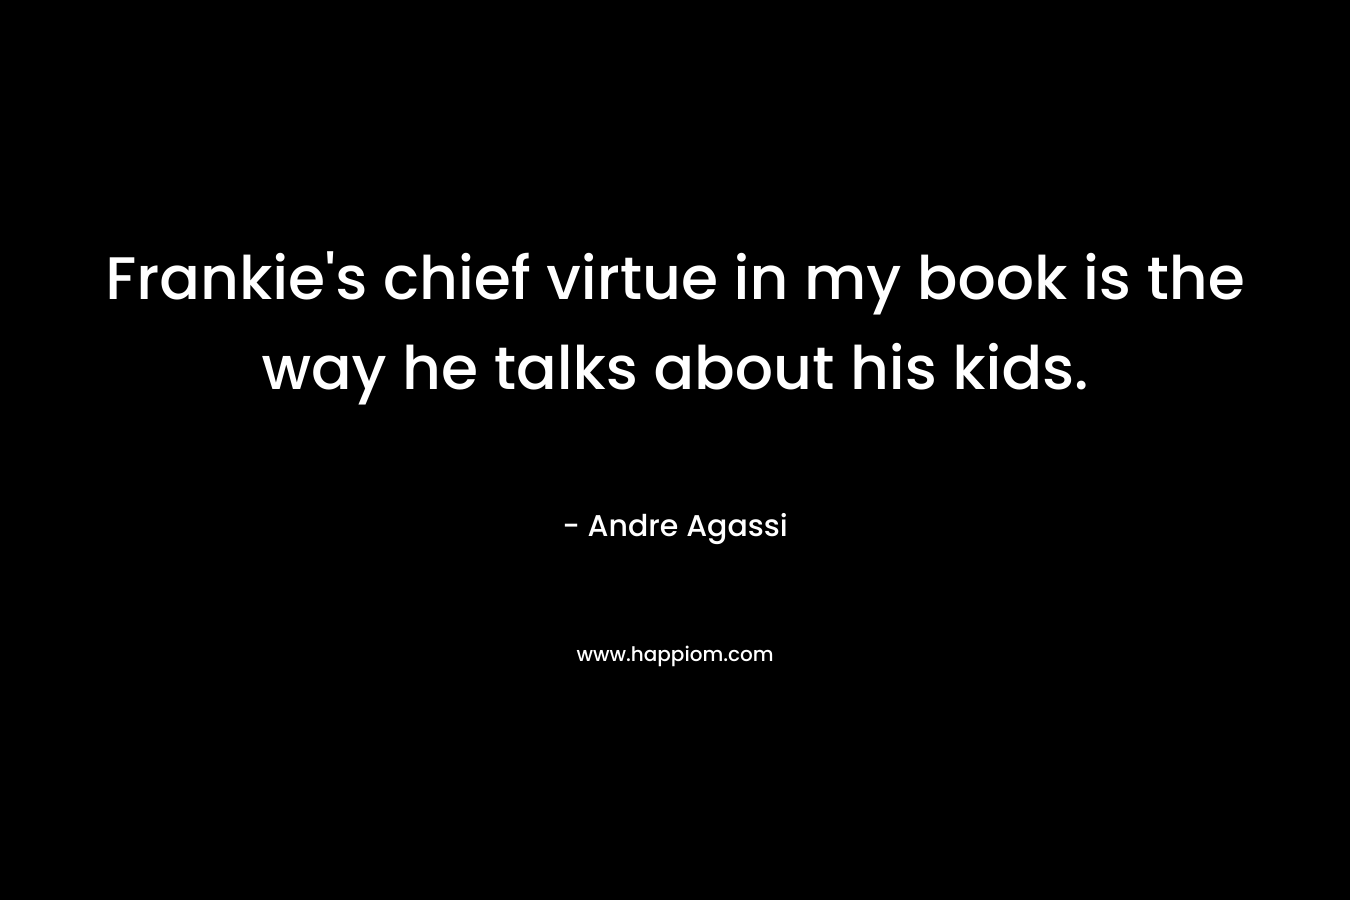 Frankie’s chief virtue in my book is the way he talks about his kids. – Andre Agassi